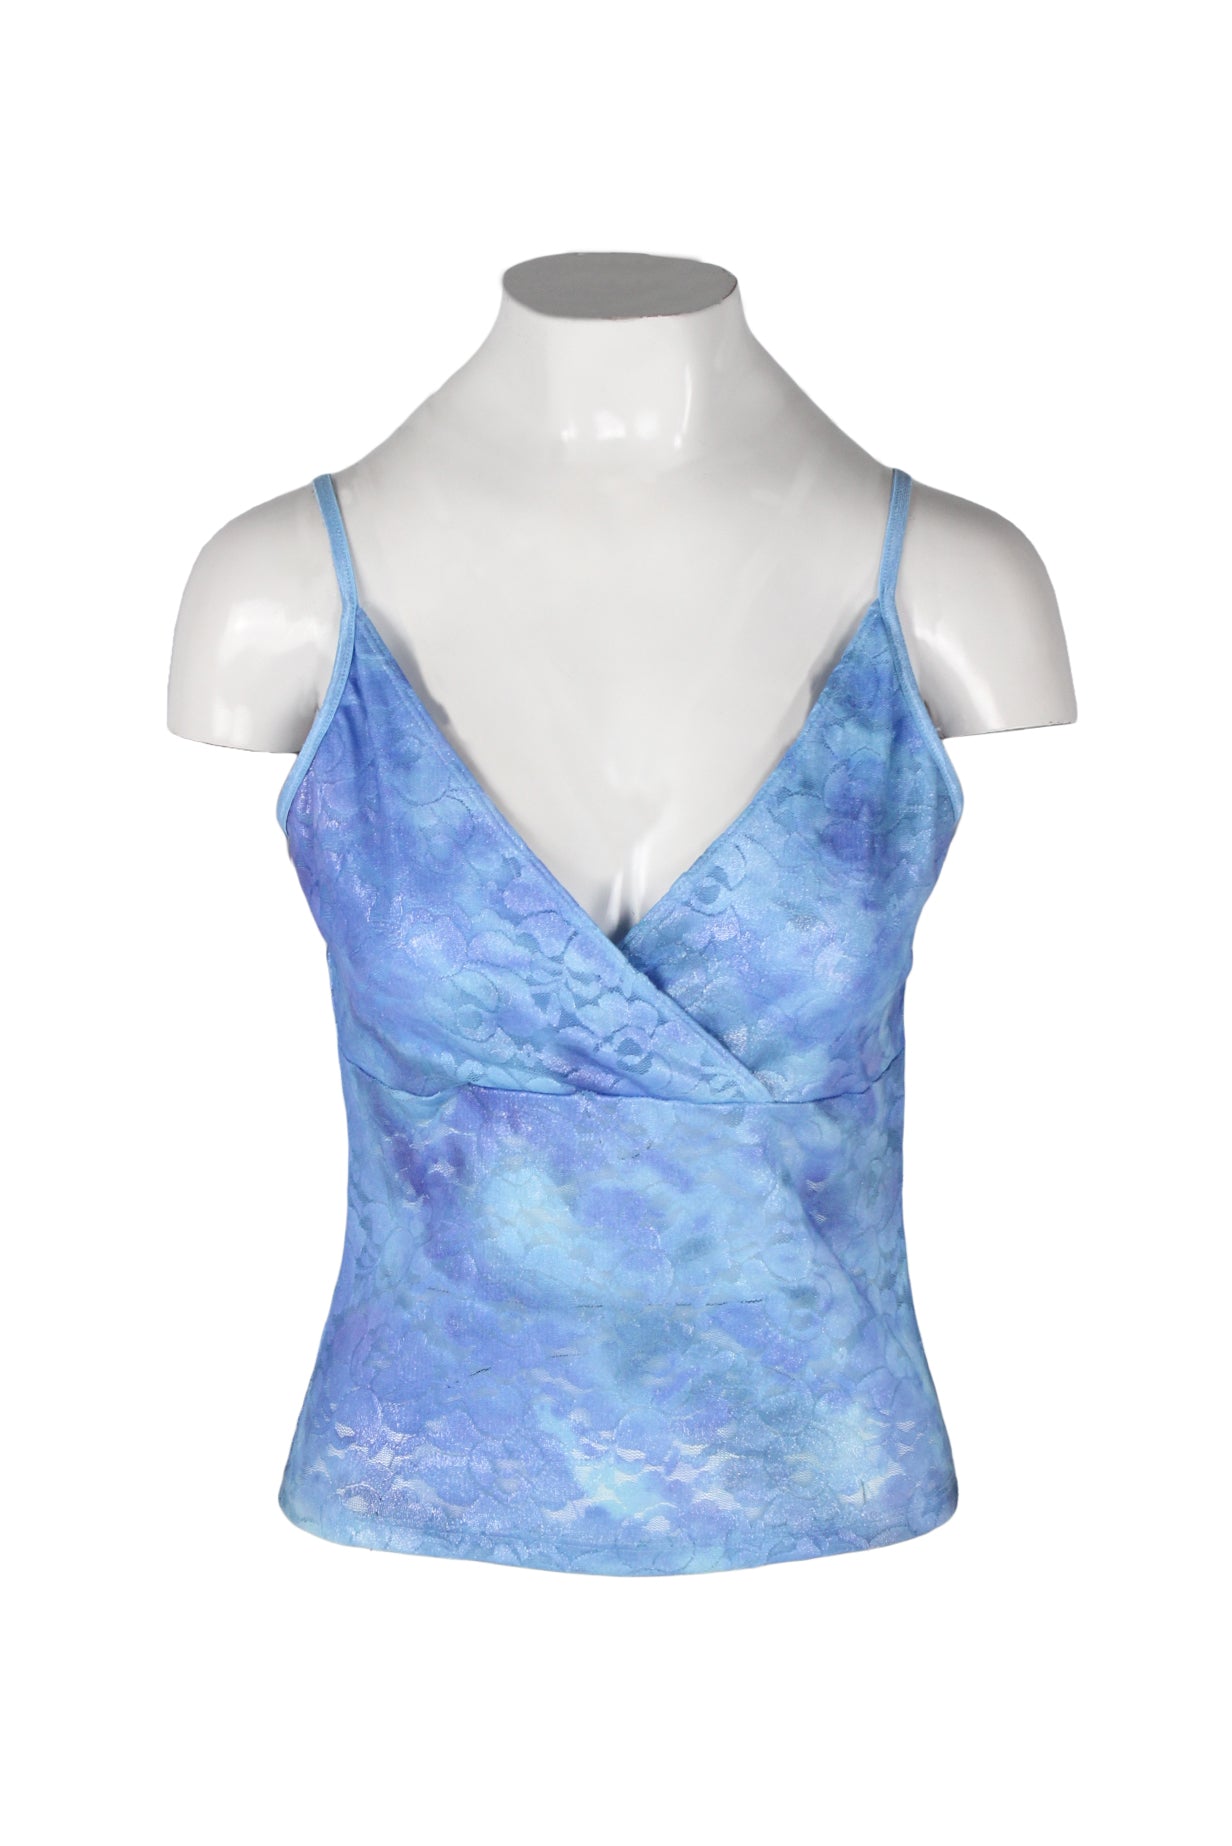 front angle of e.gen blue dyed sheer floral tank top on fem mannequin torso. features cross over v-neckline, opaque bust, spaghetti straps, and slight stretch to fabric. 